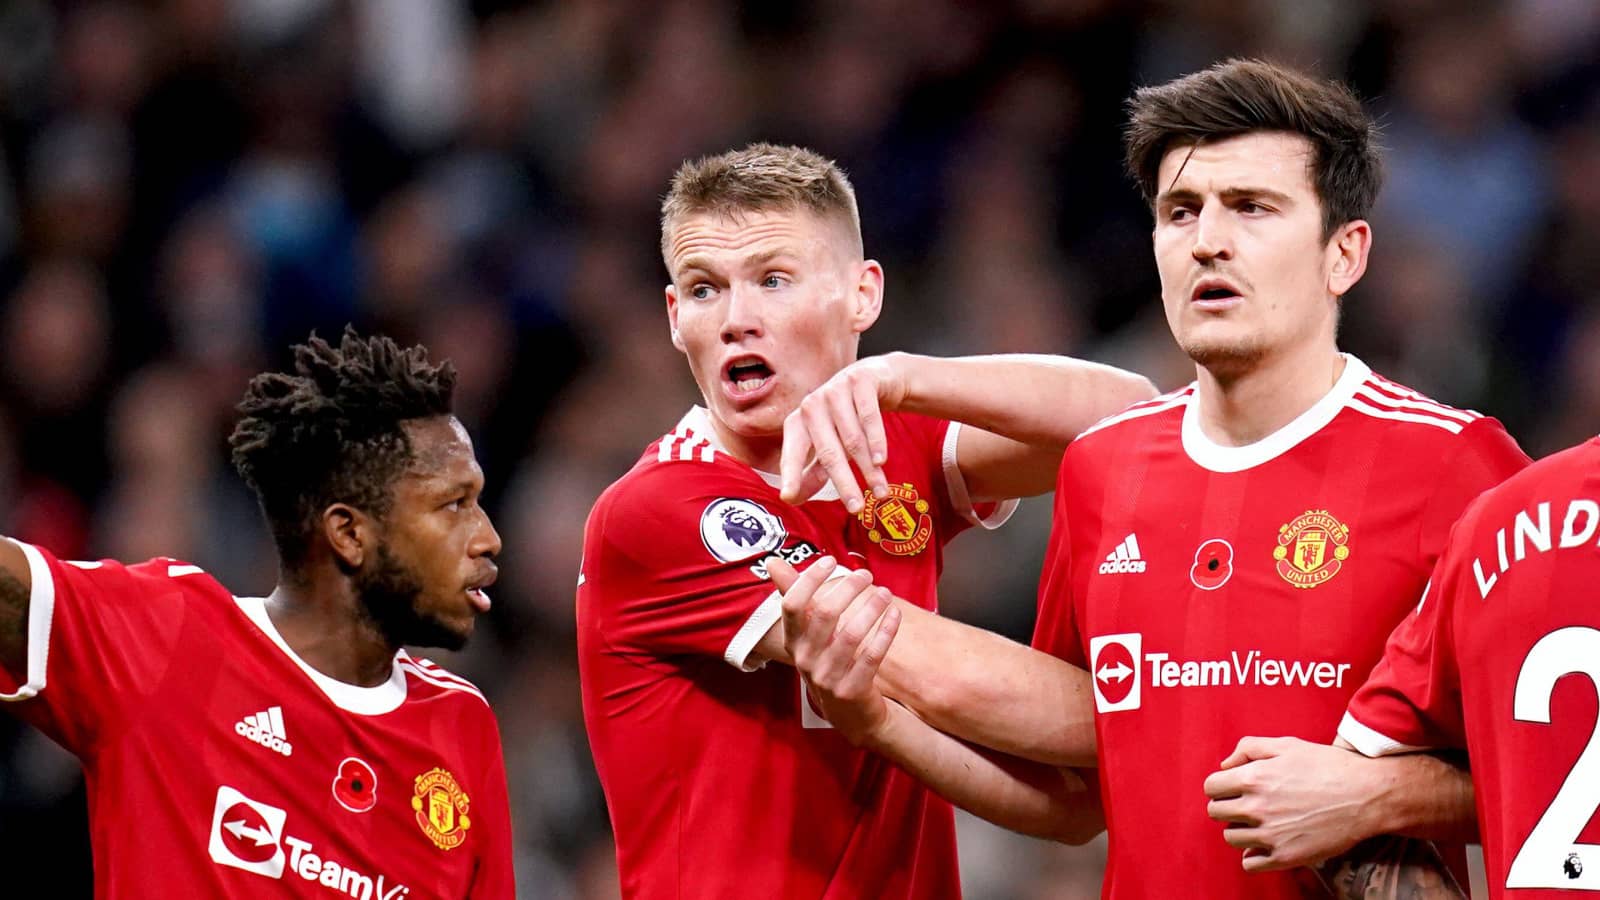 Teo The summer transfer window concludes on a triumphant note for Manchester United, as they secure THREE new signings and offload six players. !g - LifeAnimal